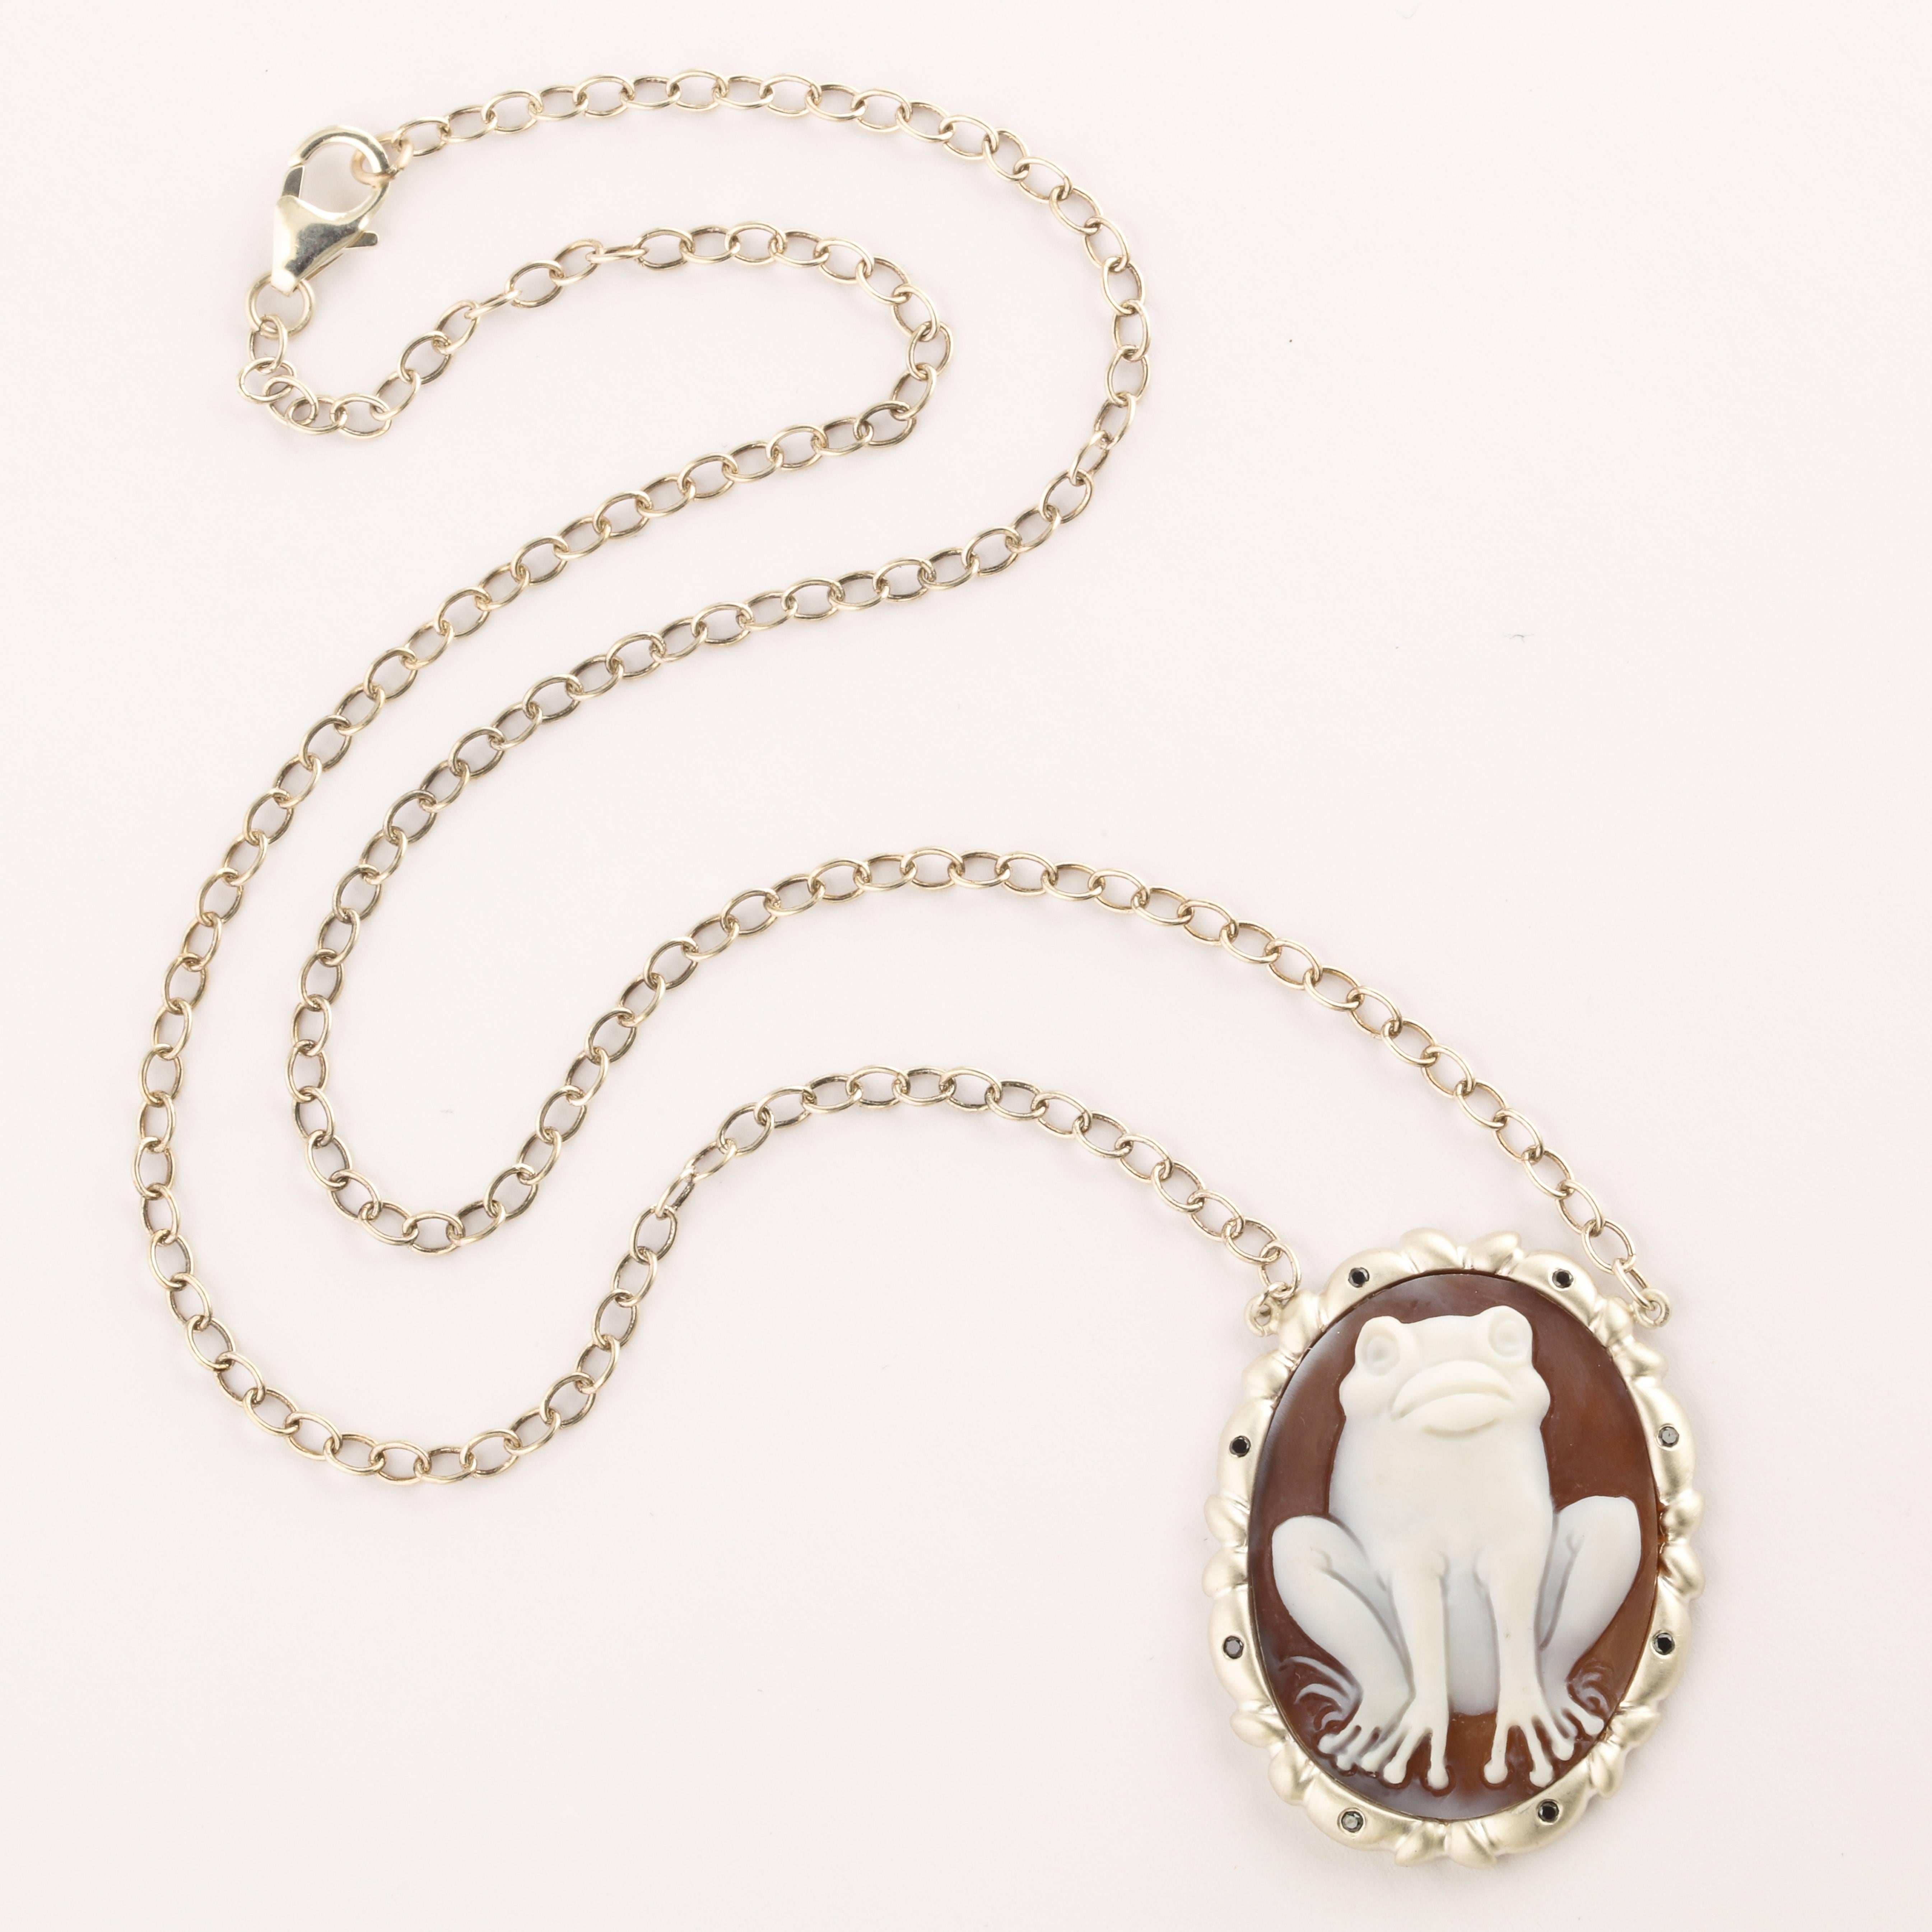 30mm sardonyx shell cameo hand-carved, set in sterling silver with black diamonds.